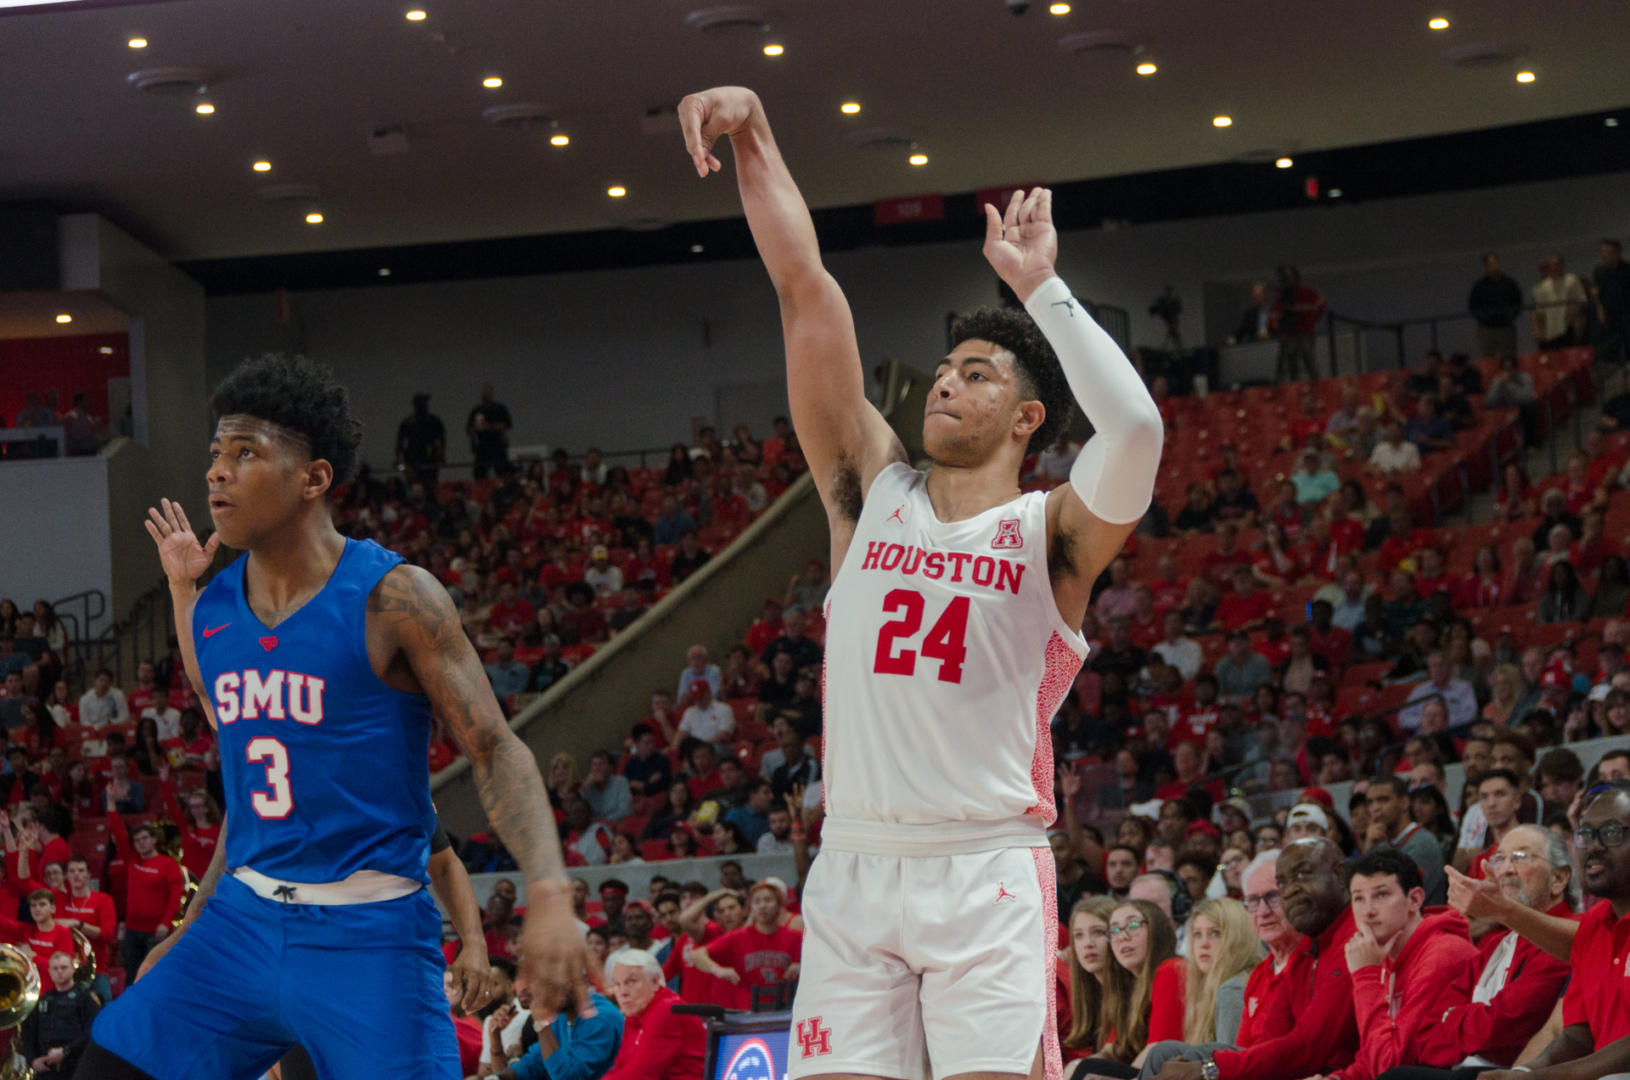 Quentin Grimes scored 15 points in the win against ECU, which are the most points he has scored in a single game during conference play. | Lino